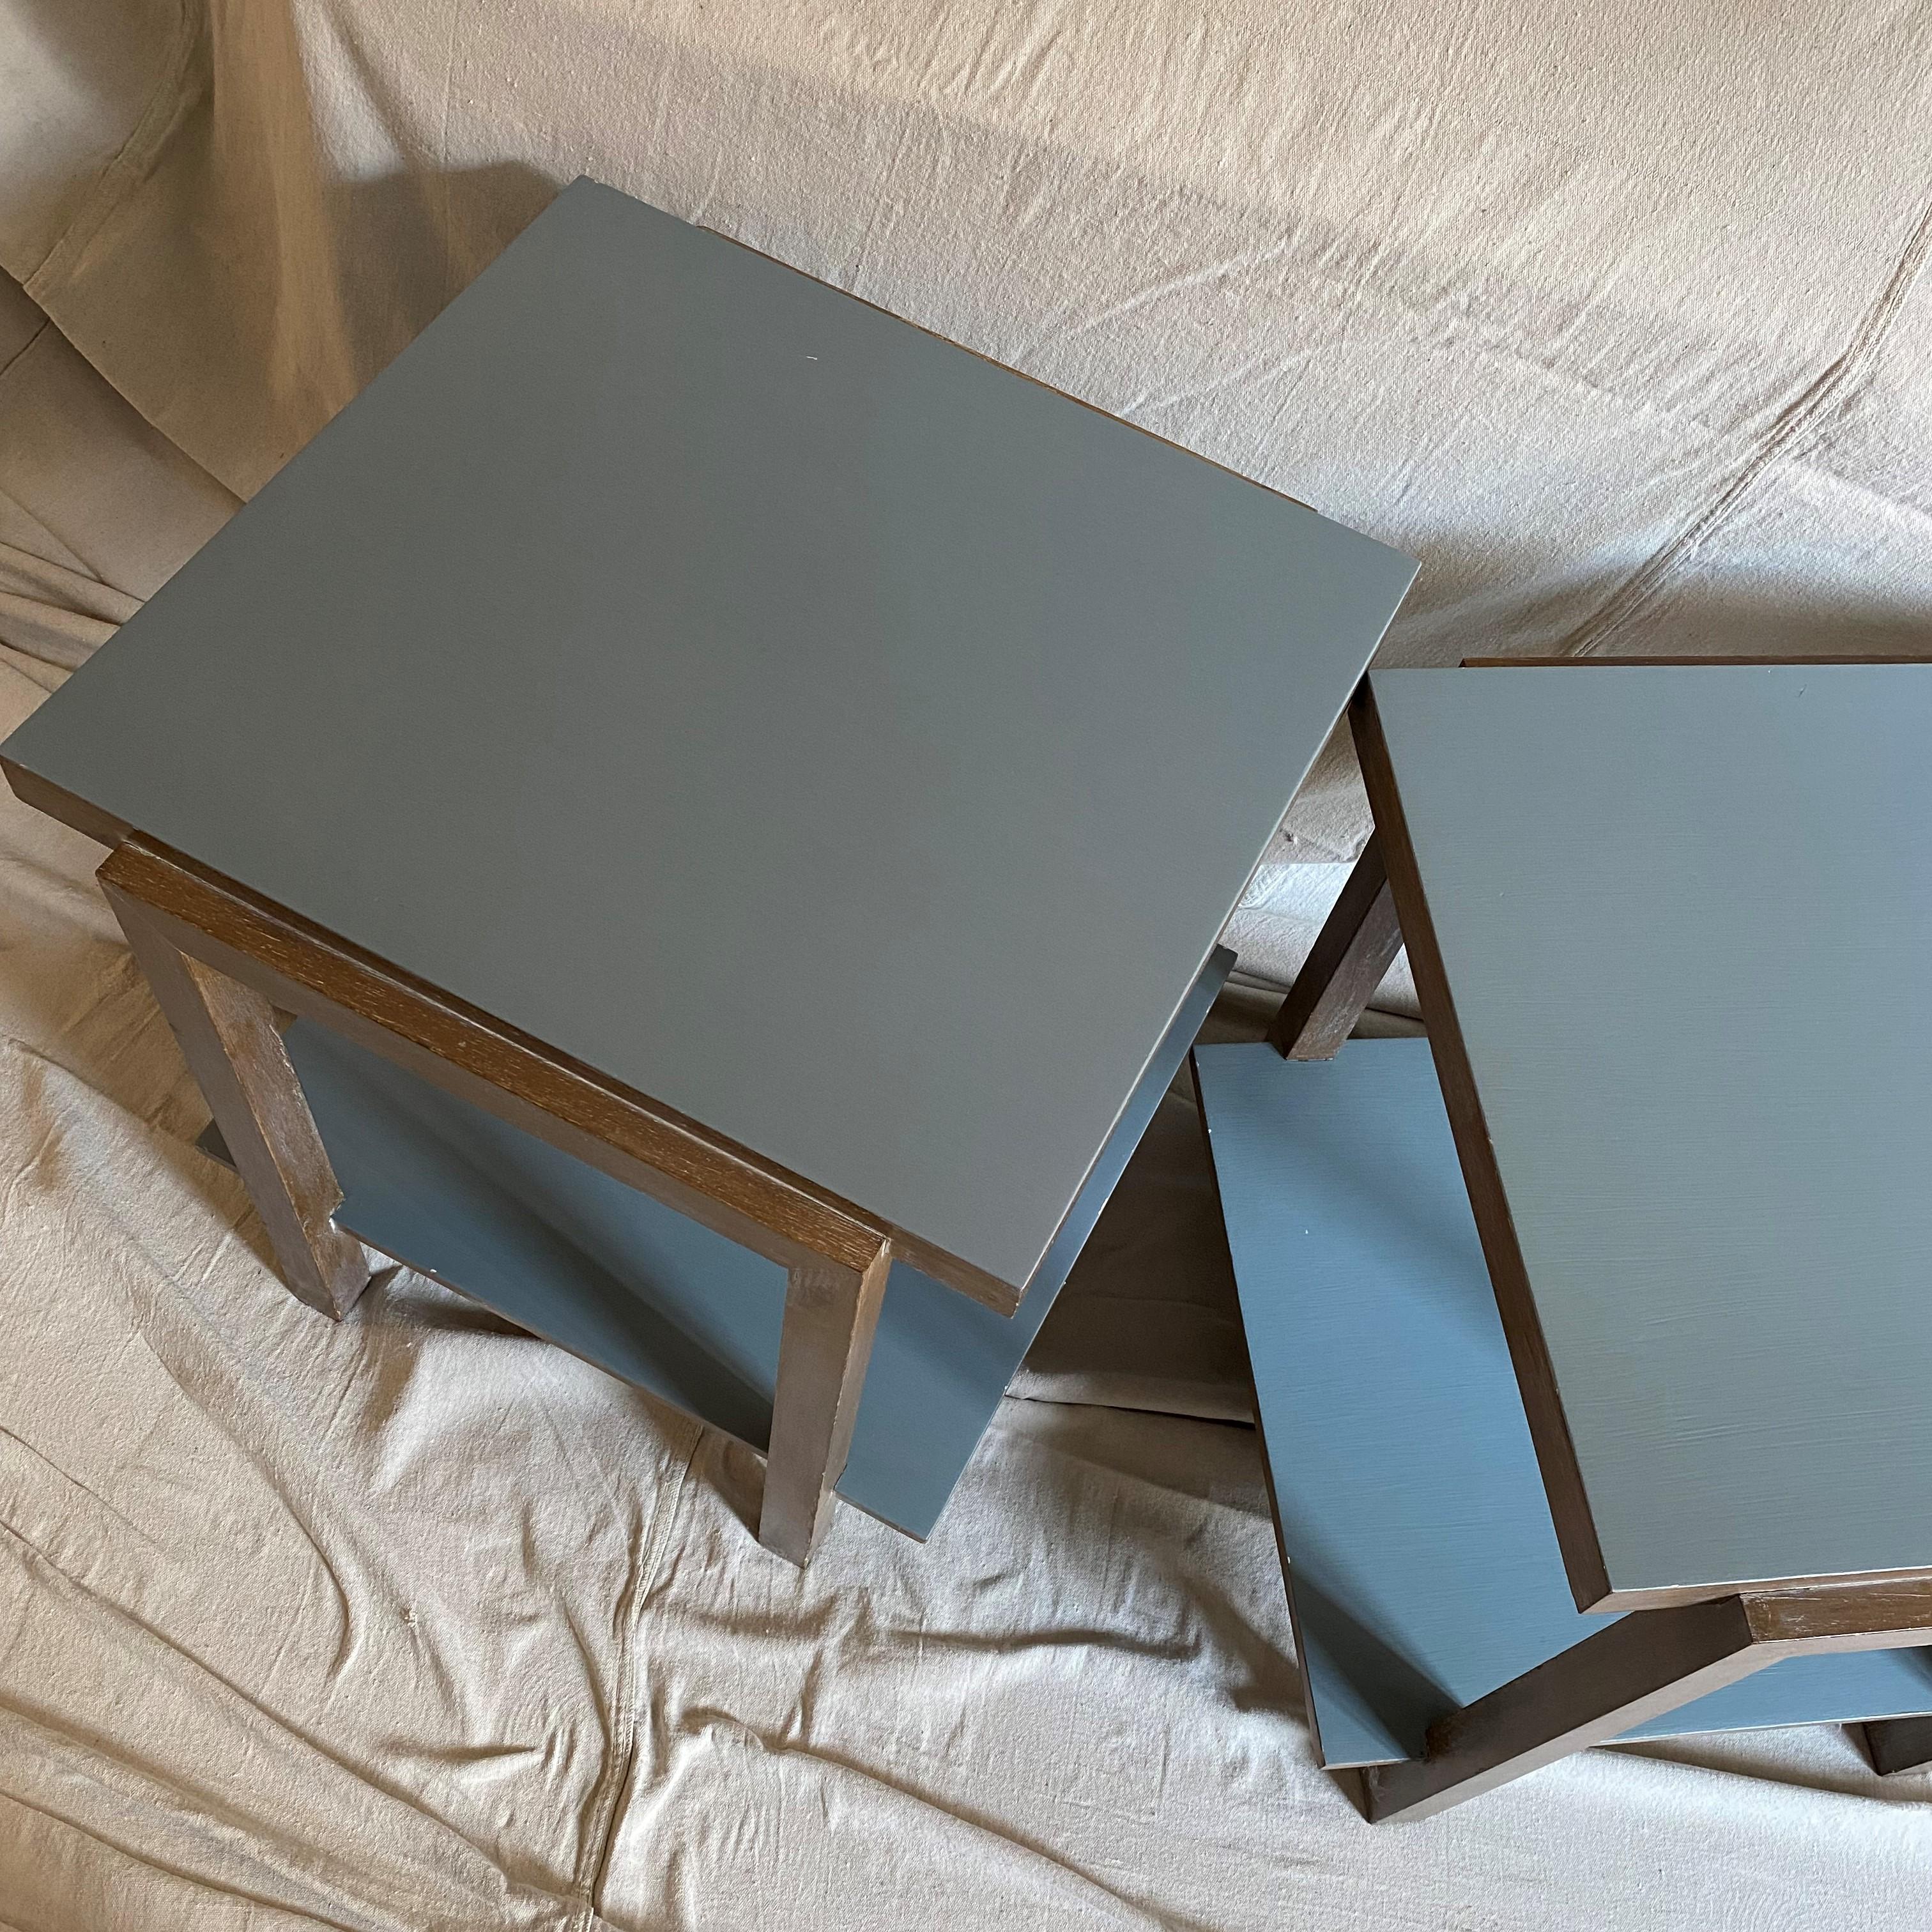 A pair of oak stained and painted occasional tables. The upper surface and lower shelf are in a painted finish easy to alter in a color of your choice if blue/gray is not ideal. The large proportions lend the tables to be placed side by side in